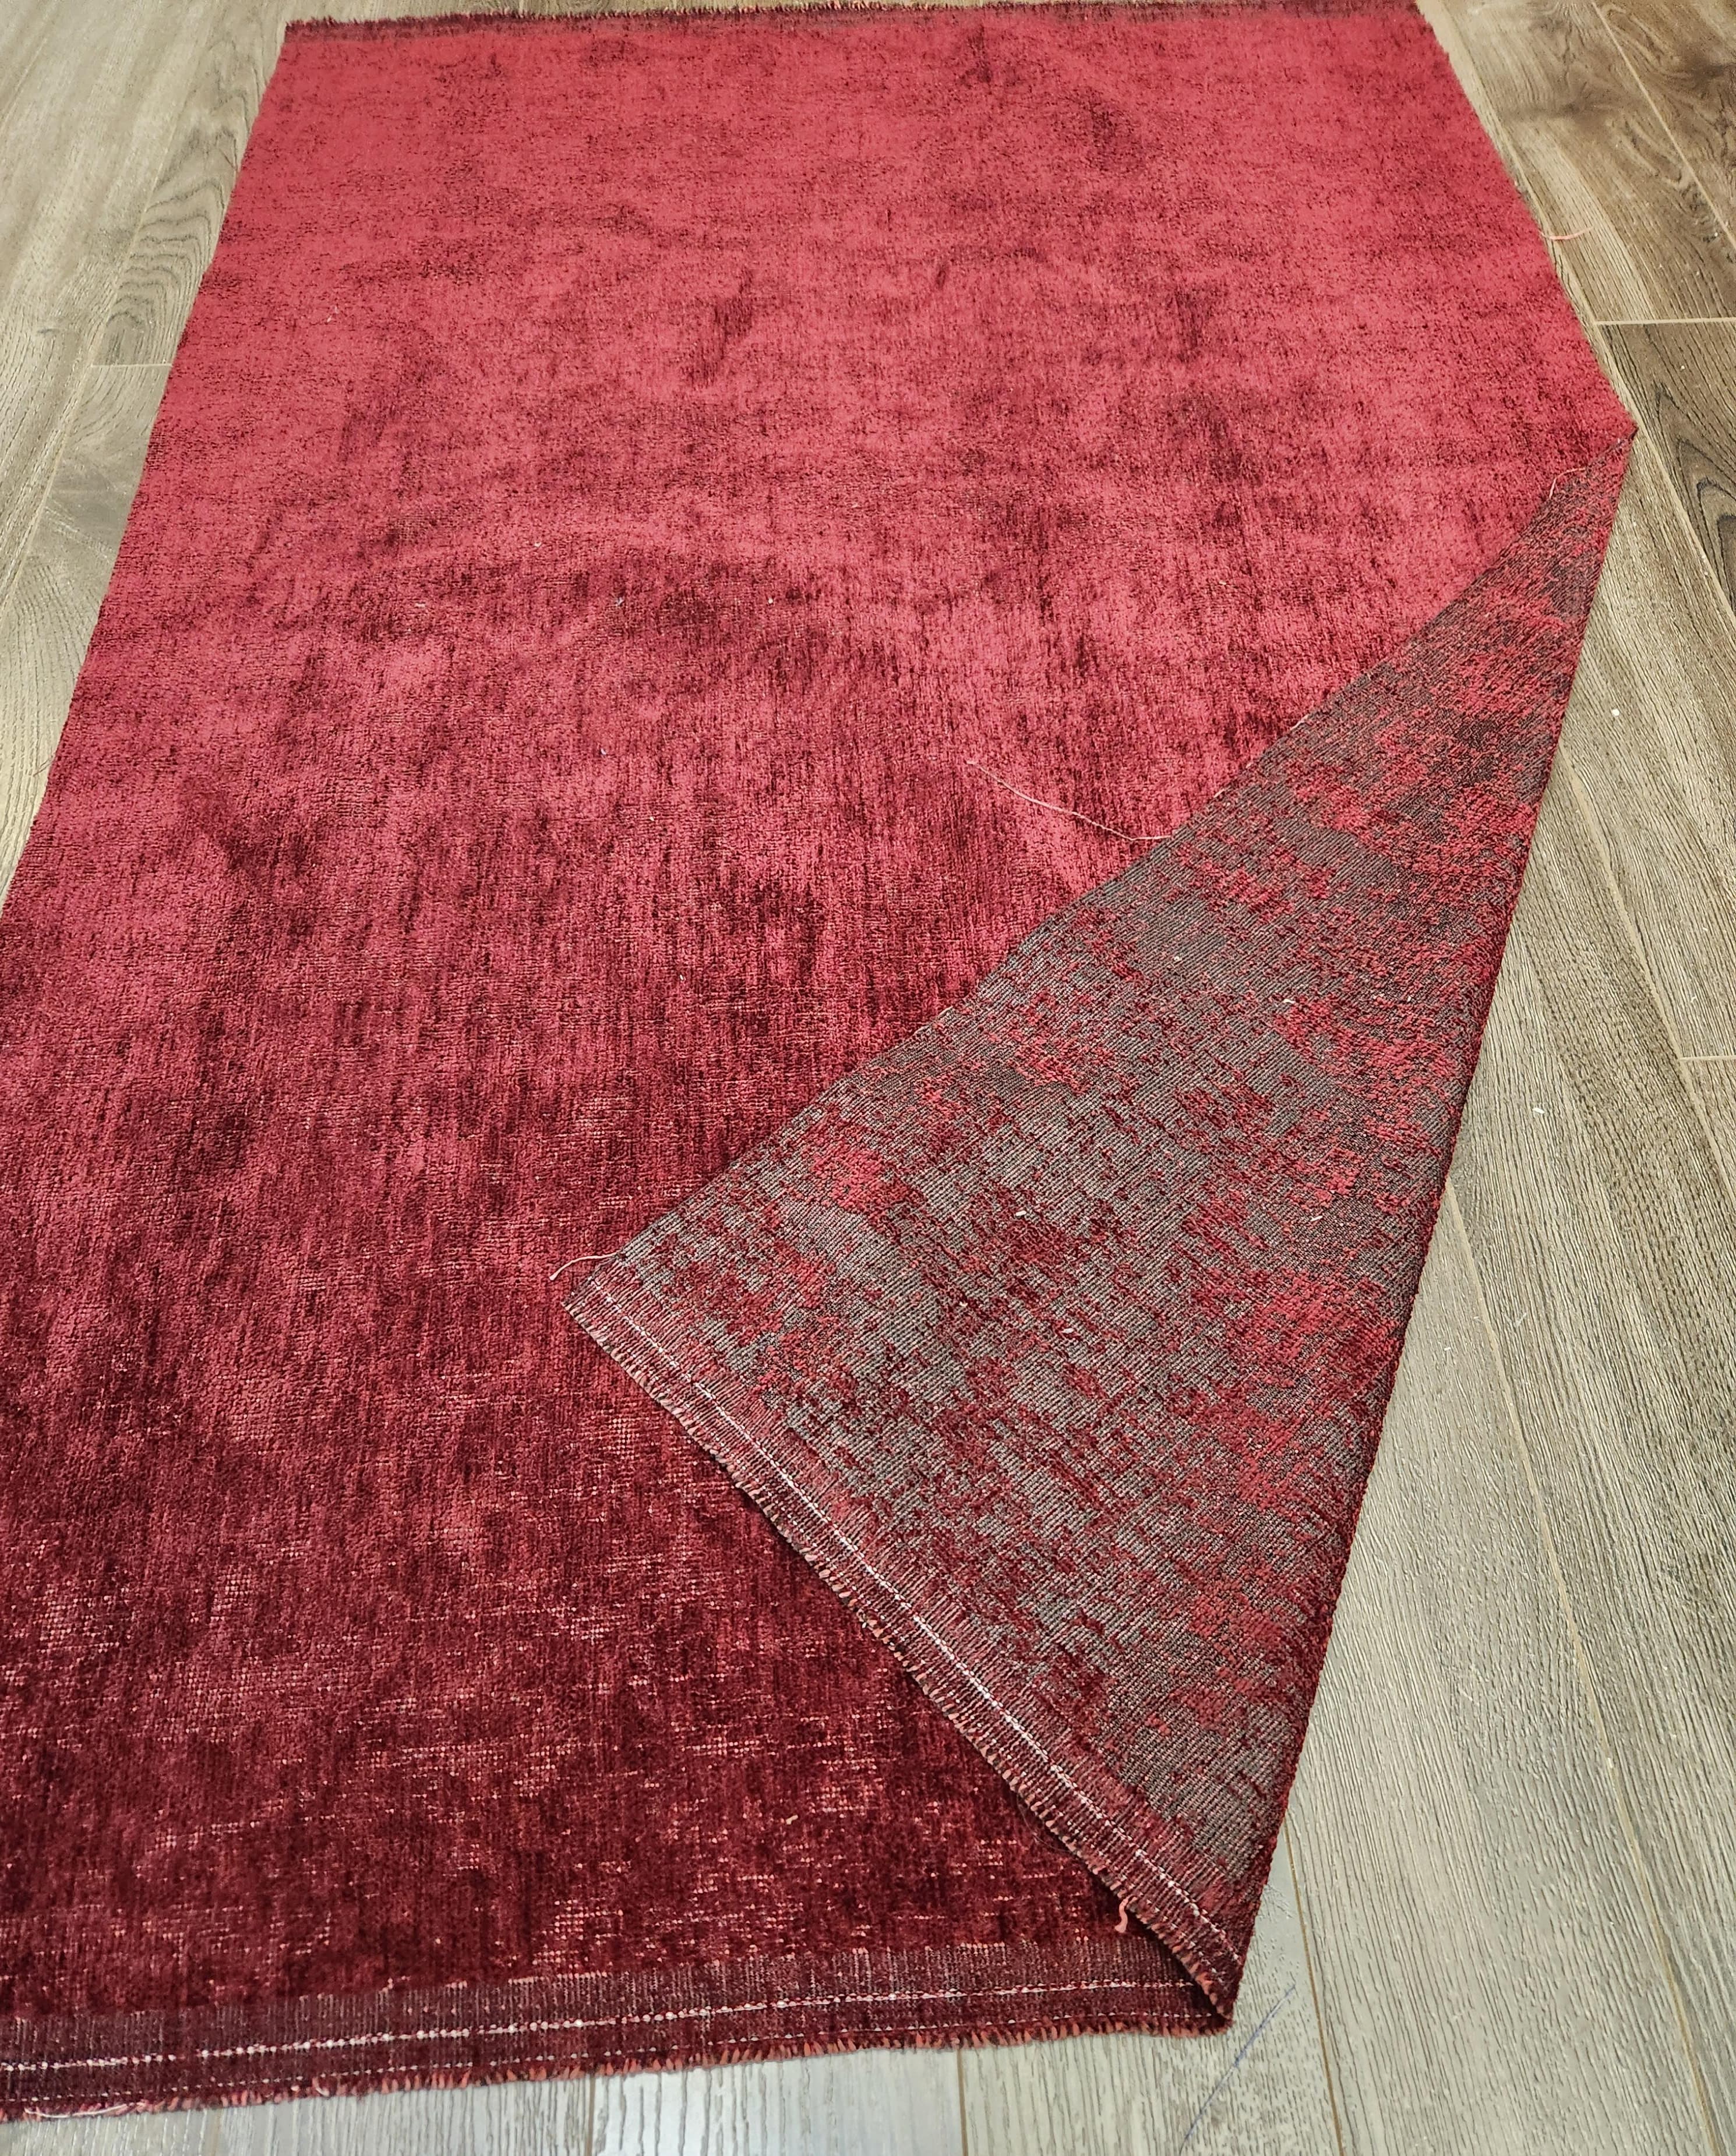 Premium Turkish Chenille Fabric in Burgundy Color (55 inch width)